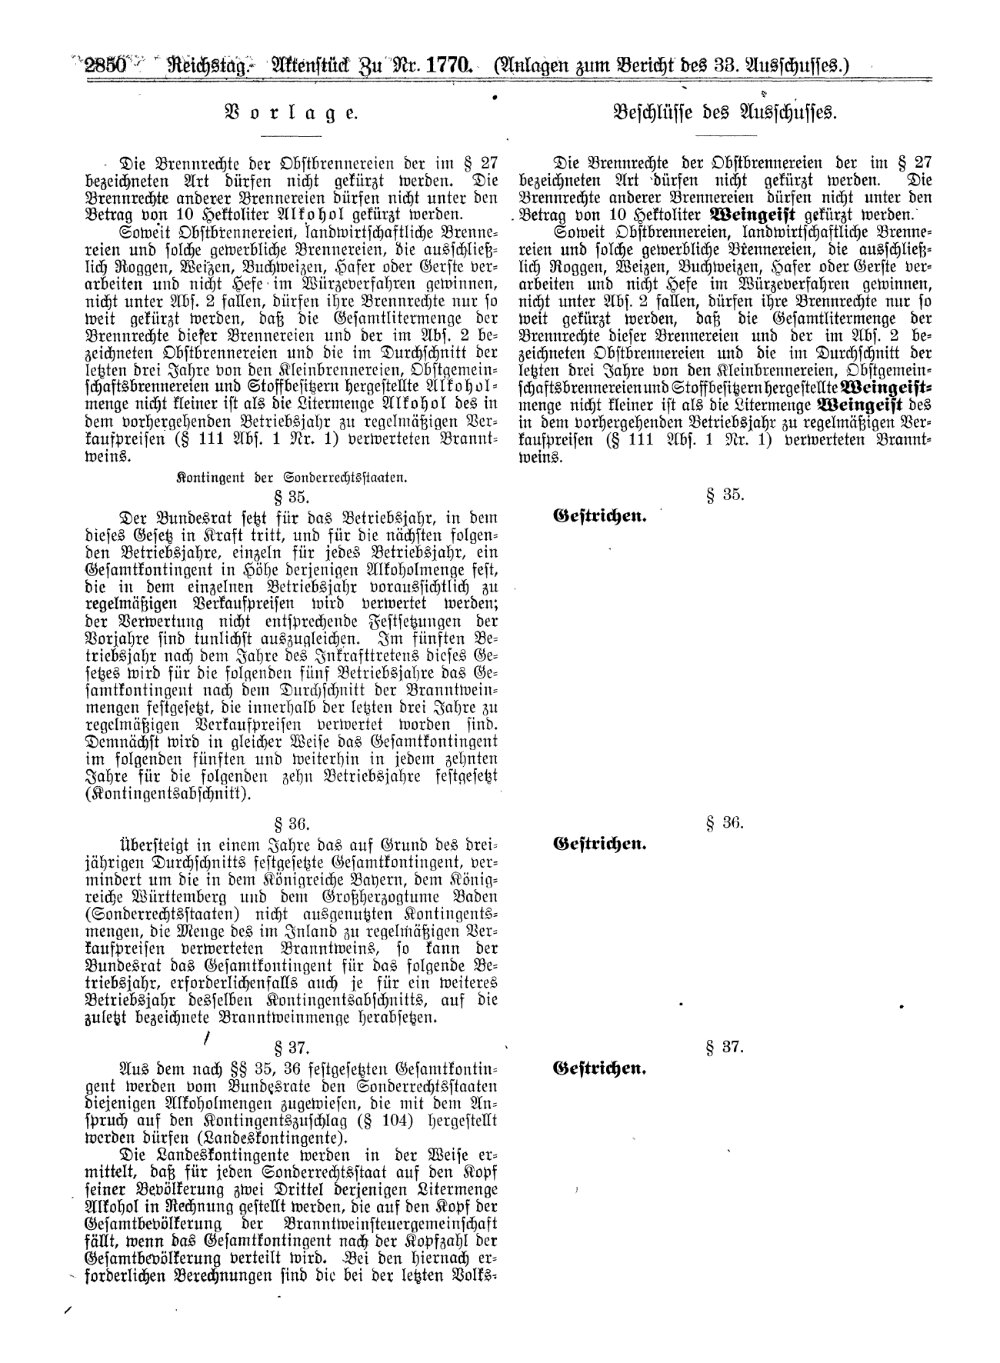 Scan of page 2850